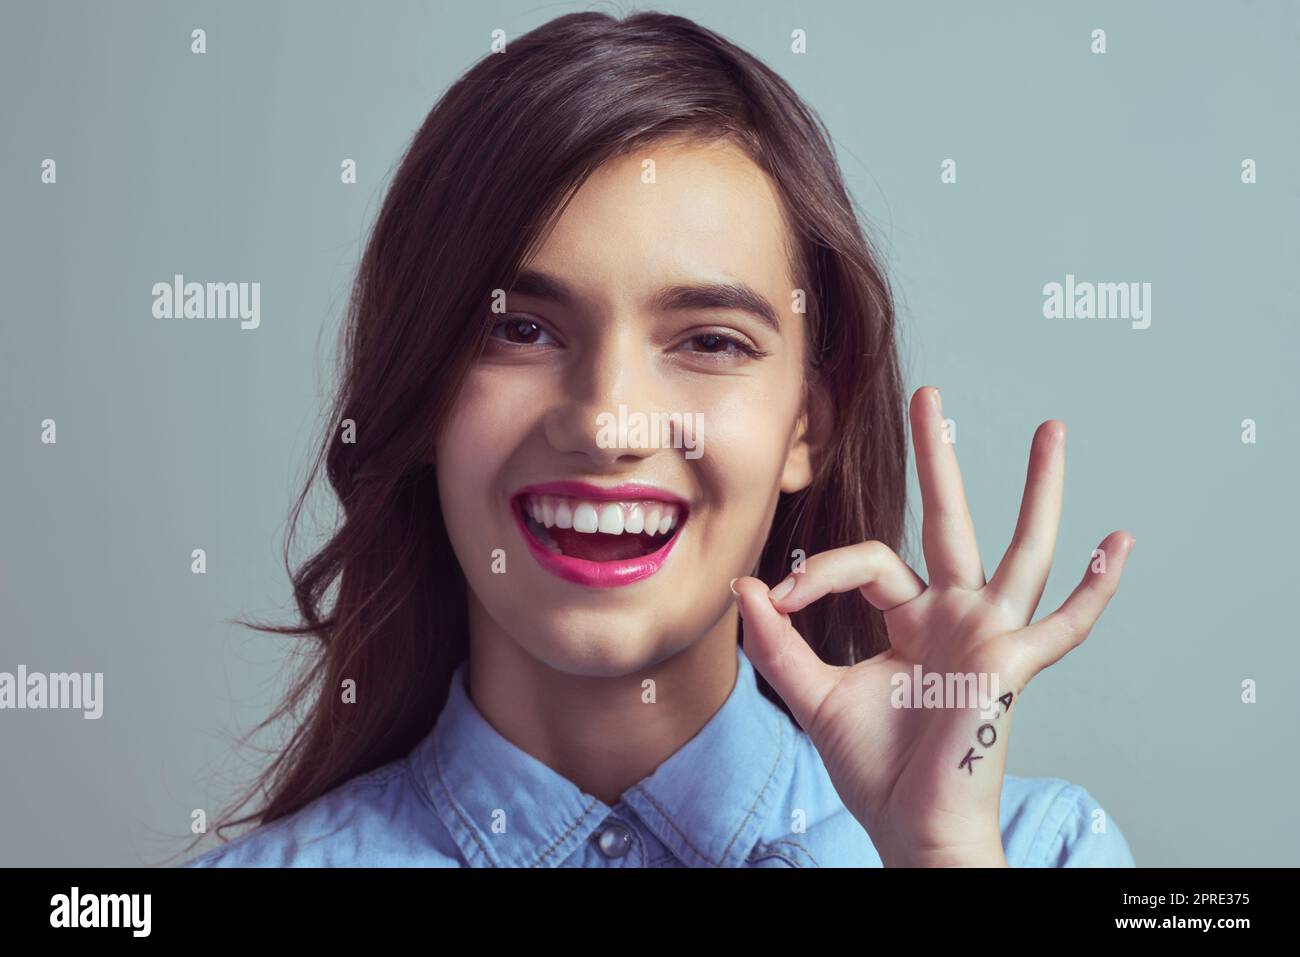 Perfection. Studio portrait of an attractive young woman making an a-okay sign with her hand against a grey background. Stock Photo